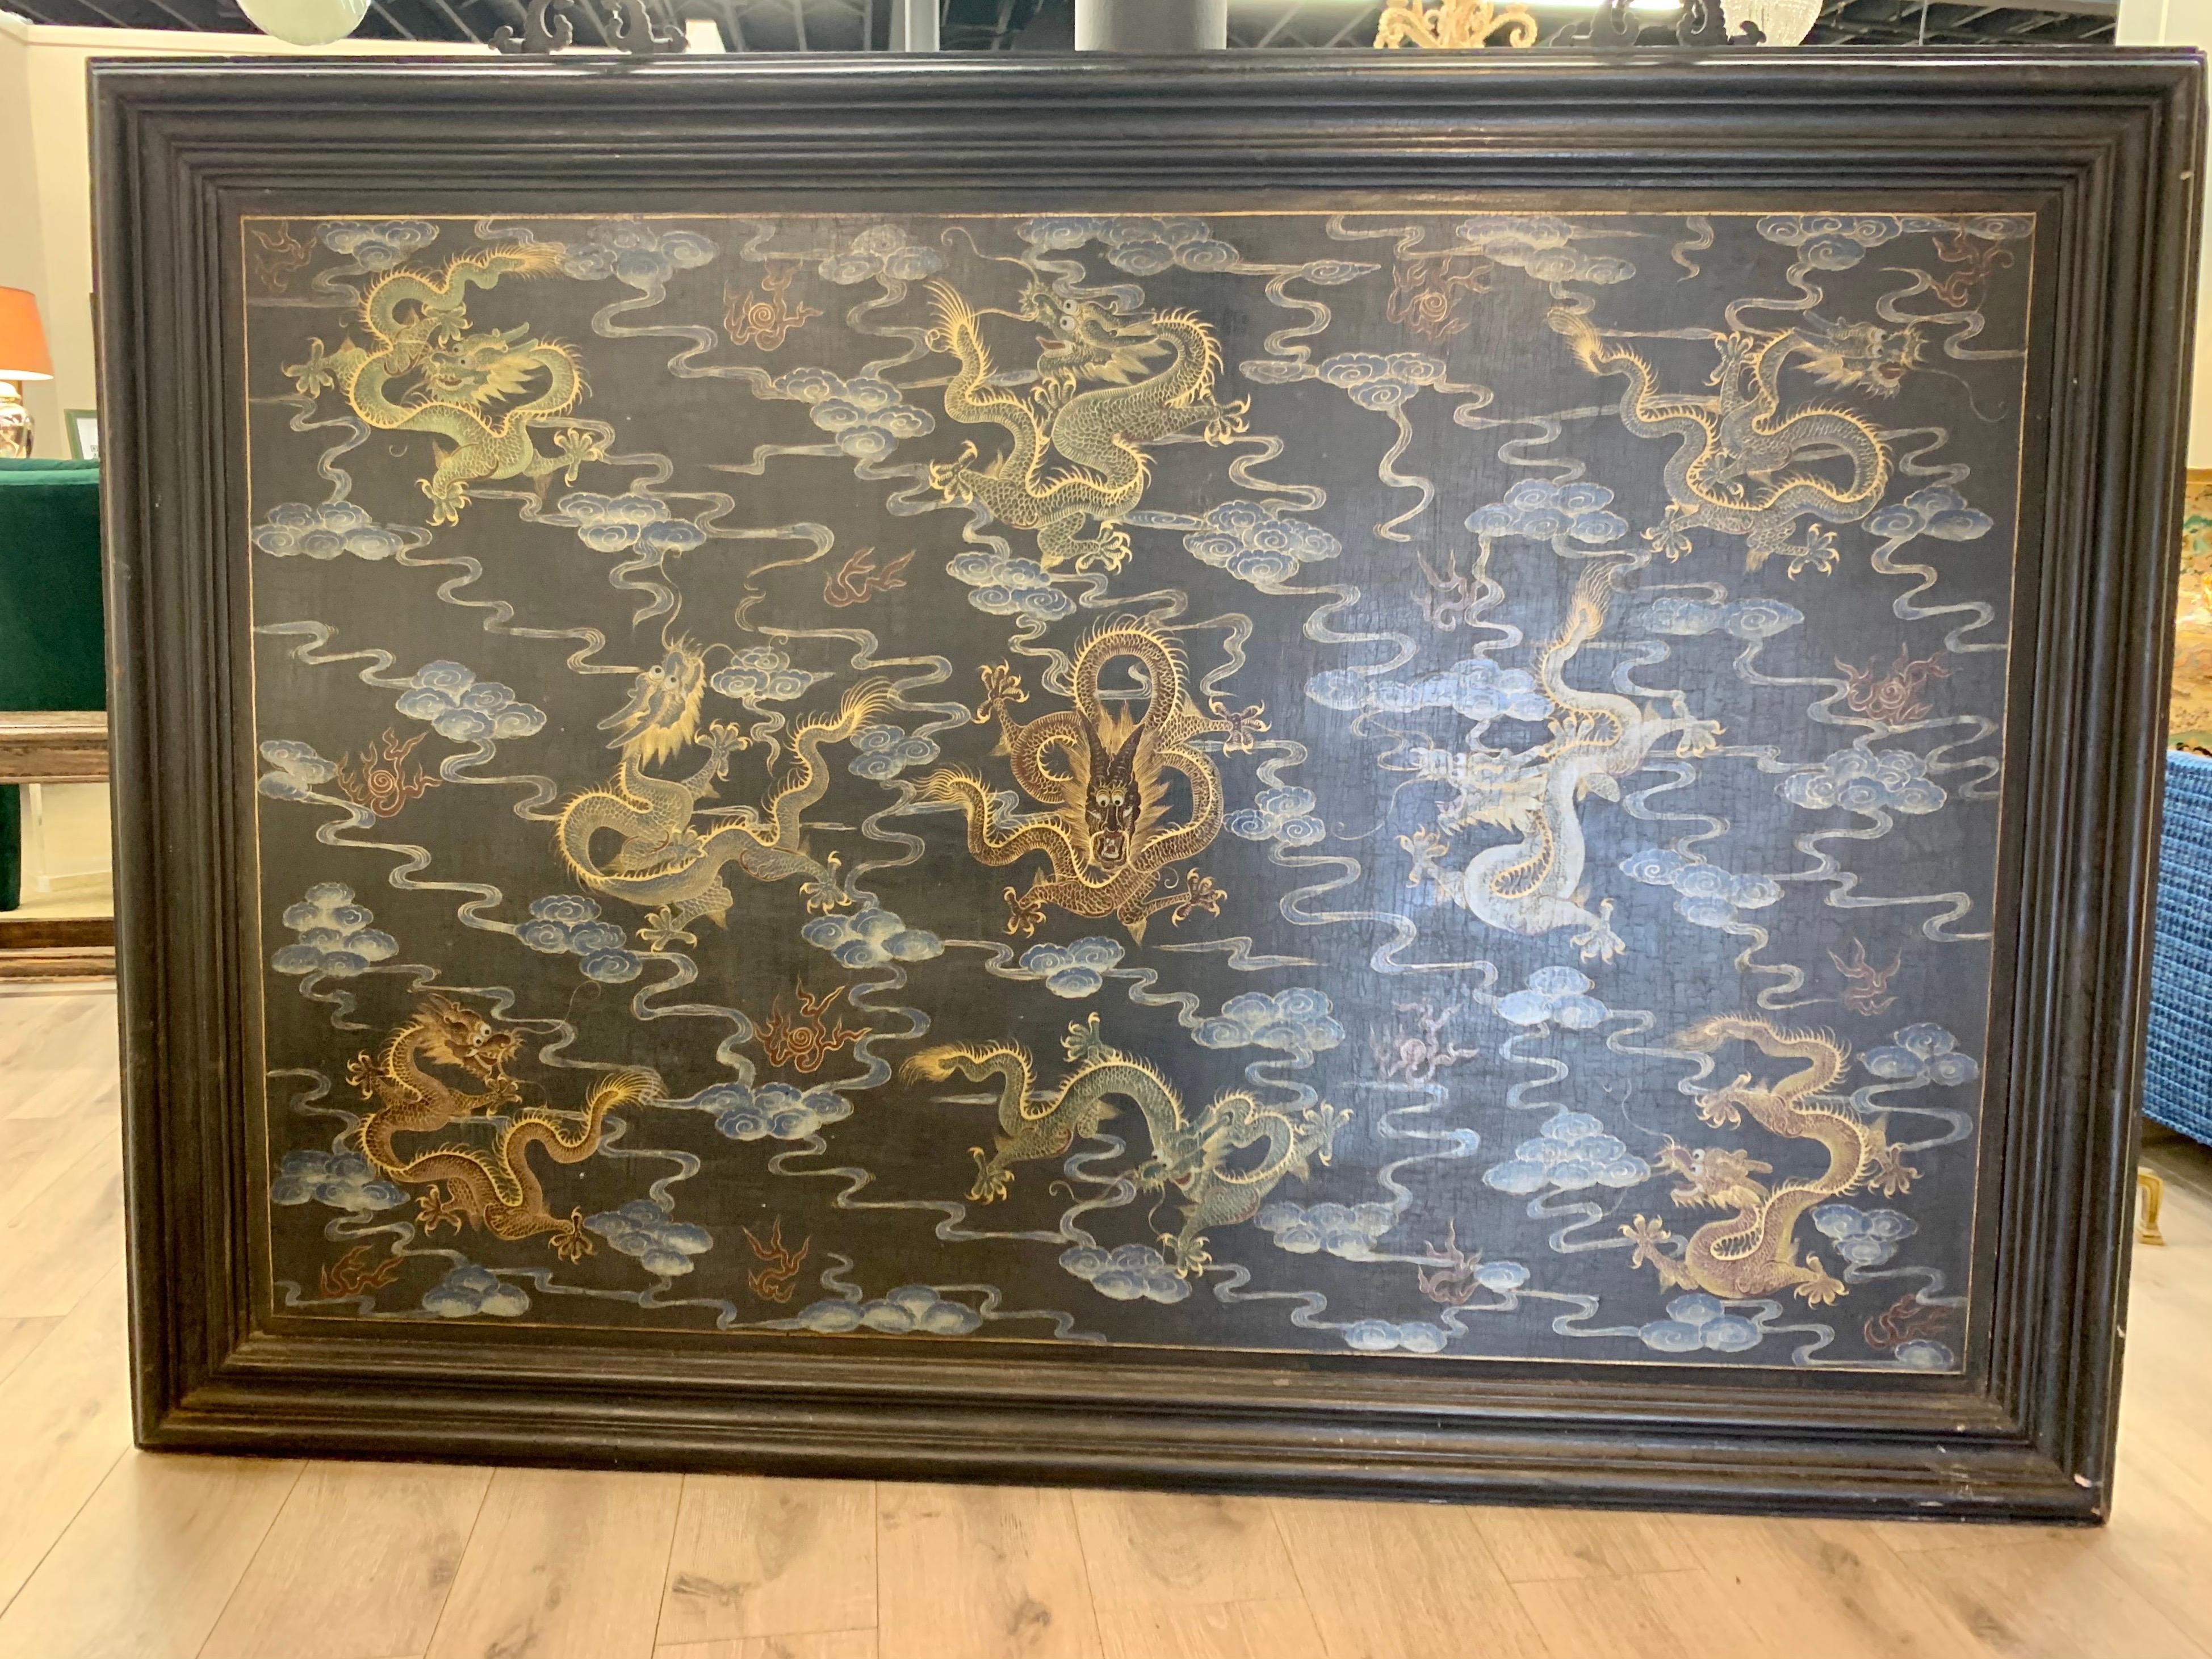 Stunning, rare, Chinese Export original oil painting on board. Adorned with Chinese dragons and
the like. Age appropriate wear. One of a kind. All original including the hooks at top.
Now, more than ever, home is where the heart is.